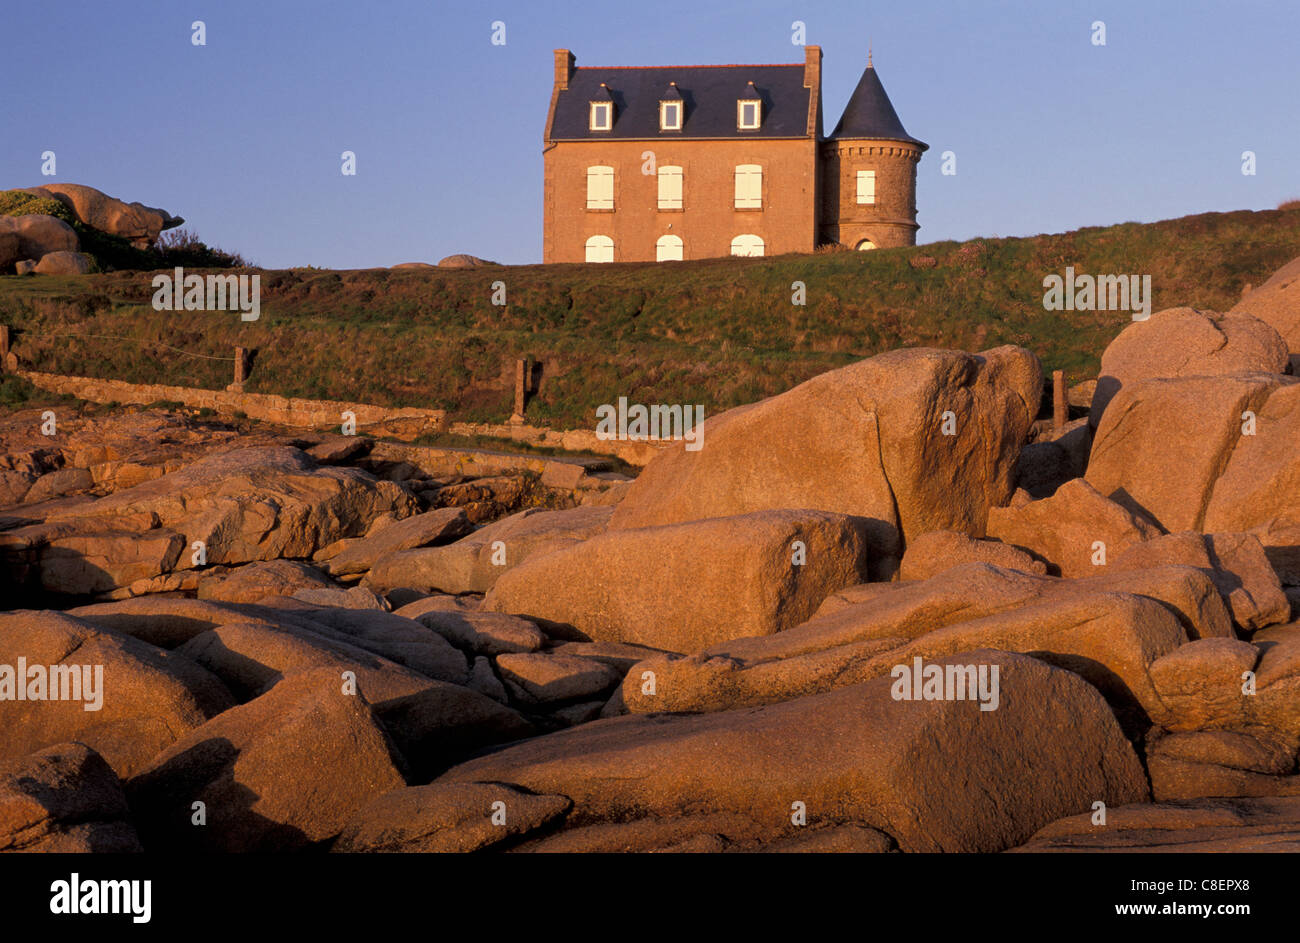 House, Red Rocks, Evening light, Ploumanach, Brittany, France, Europe, Stock Photo